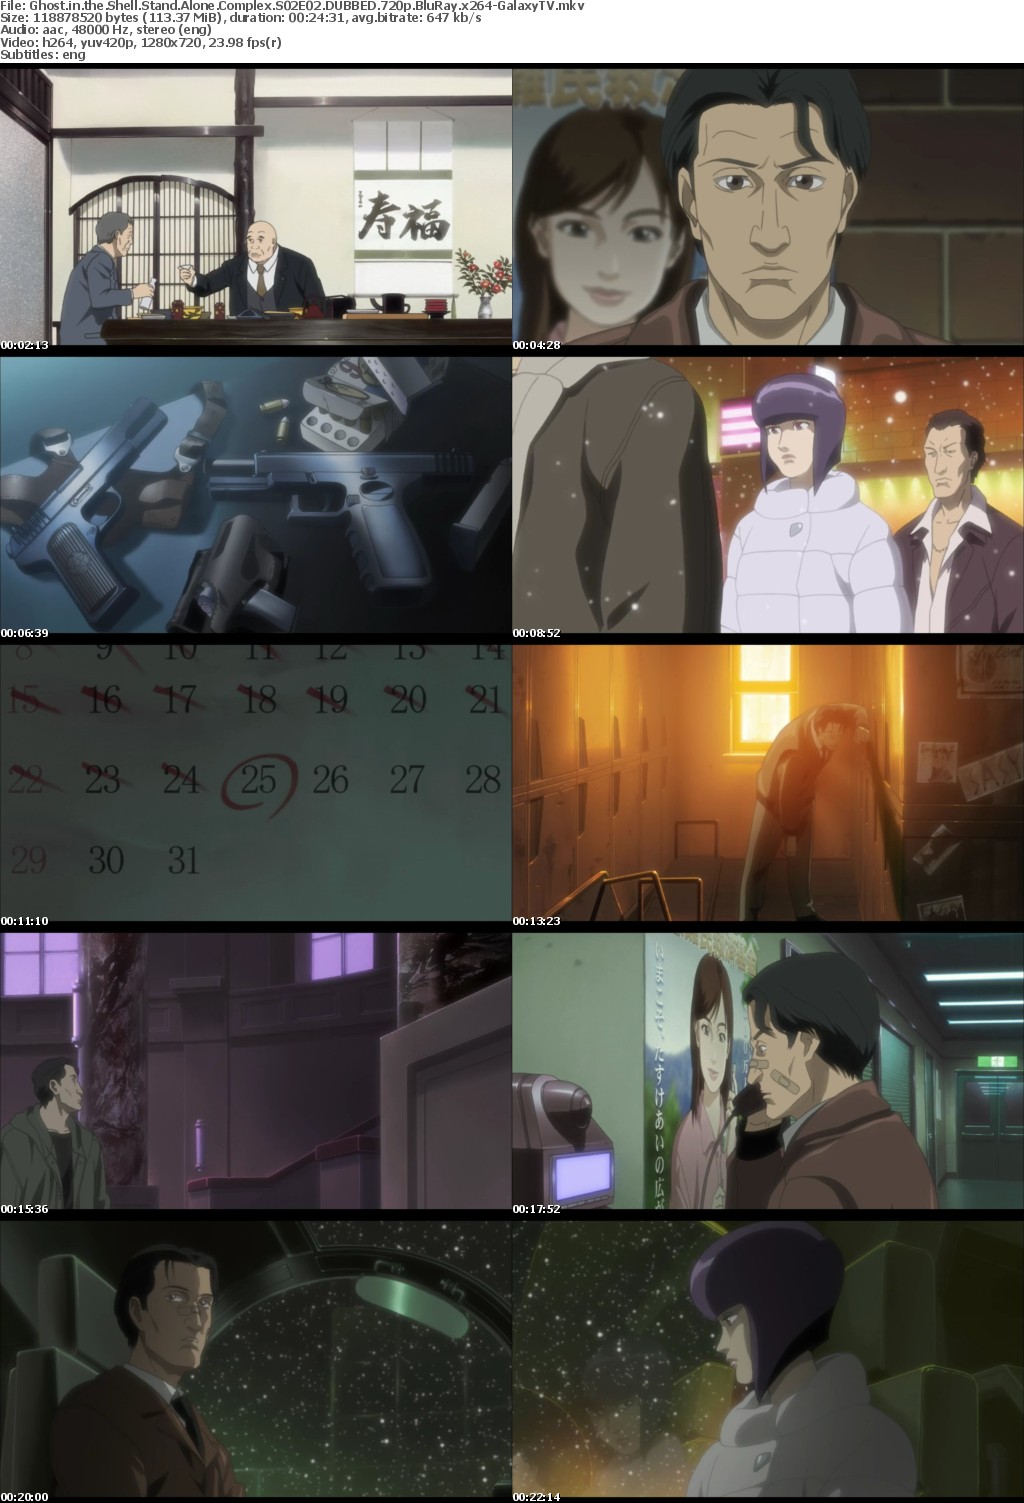 Ghost in the Shell Stand Alone Complex S02 COMPLETE DUBBED 720p BluRay x264-GalaxyTV